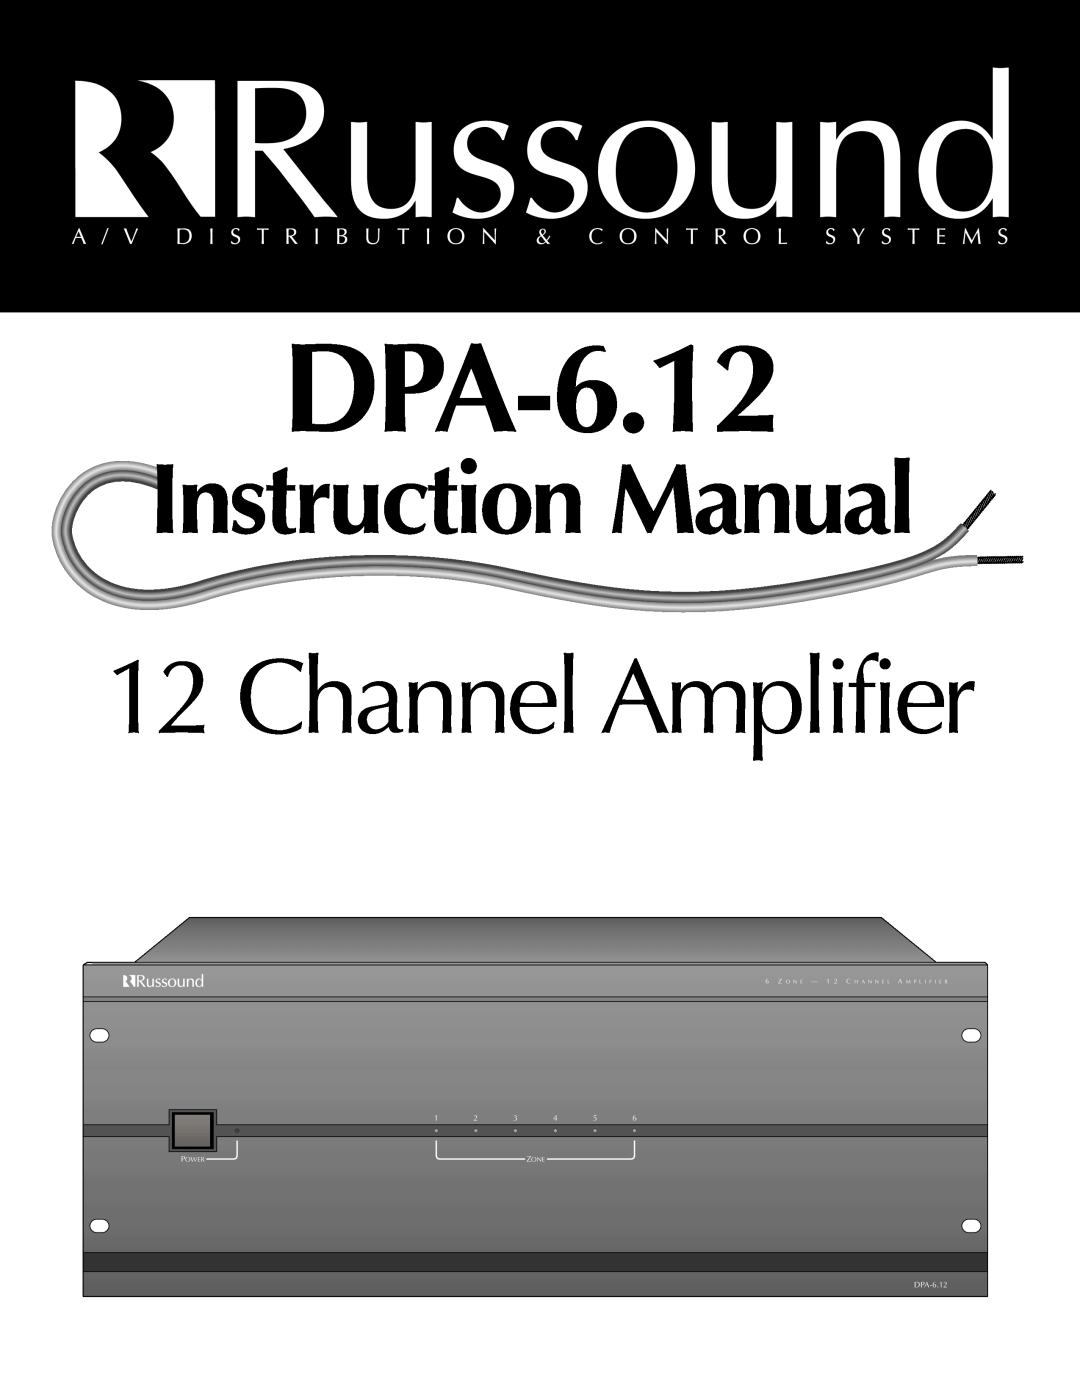 Russound DPA-6.12 instruction manual Channel Amplifier, Zone 